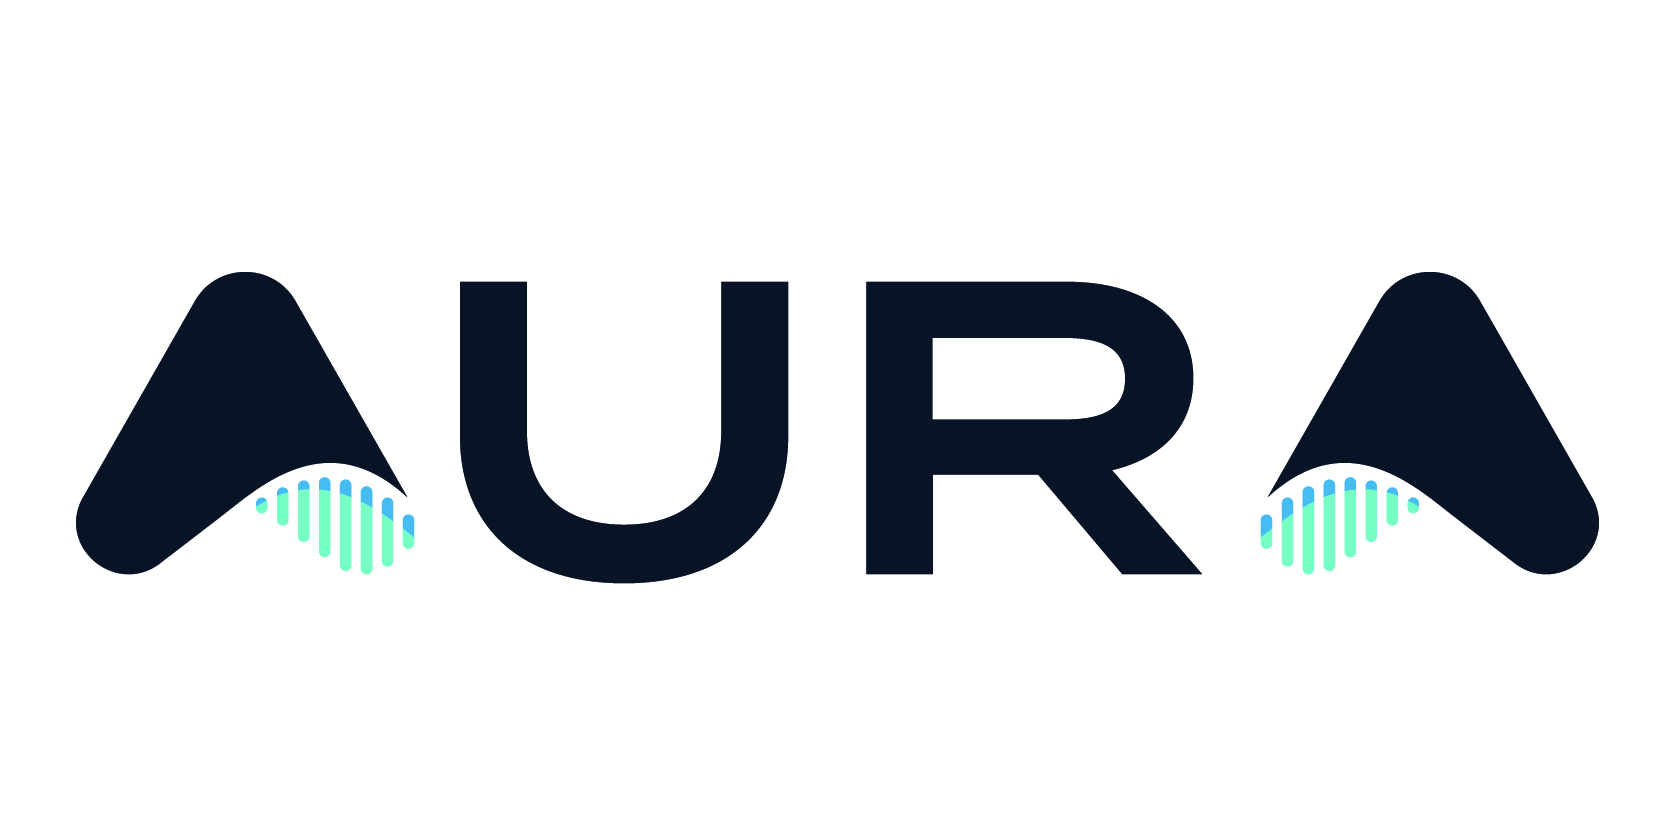 AURA Secures $75 Million in New Funding Round